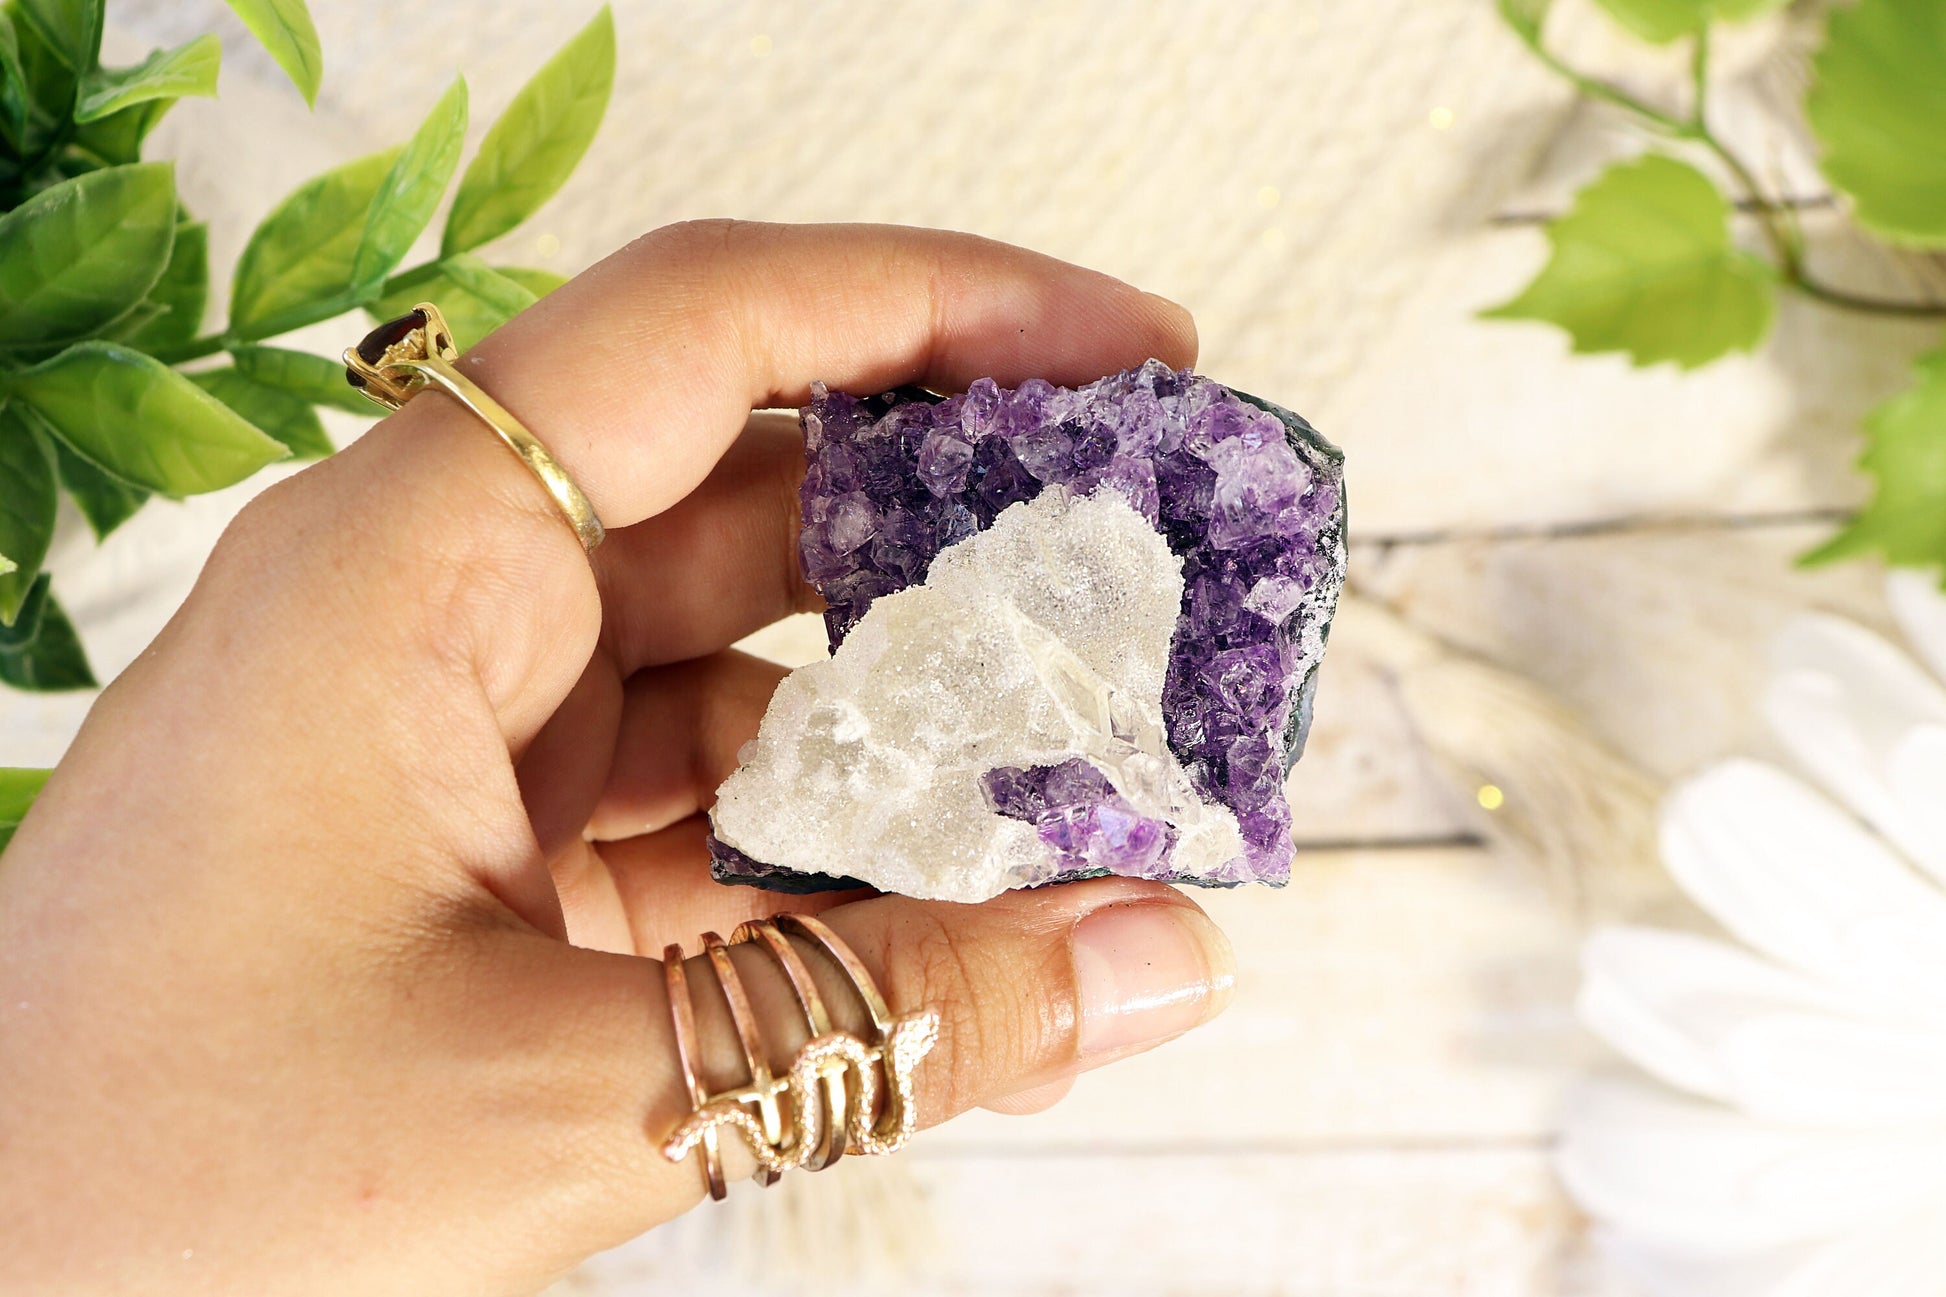 Amethyst Druze With Calcite Infusion | Amethyst Druze Specimen